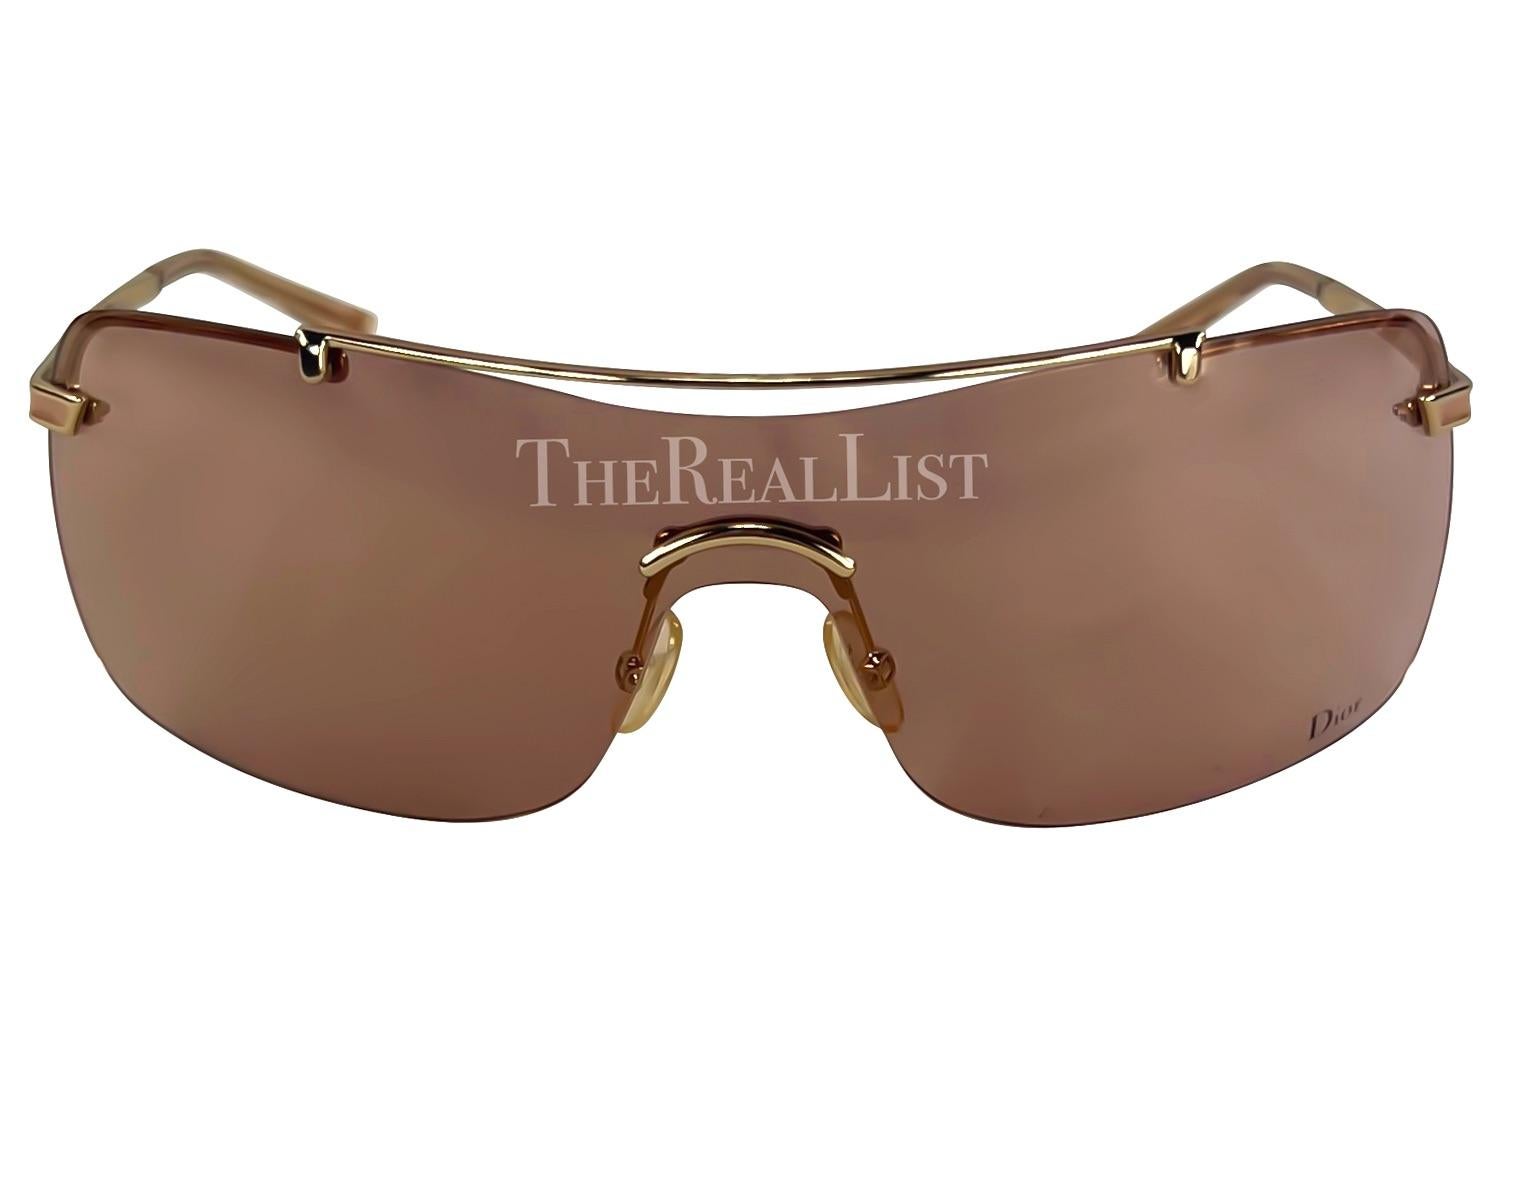 Presenting a pair of dusty pink Christian Dior by John Galliano sunglasses. From the early 2000s, these rimless shield sunglasses showcase exquisite craftsmanship. The gold-tone hardware adds a touch of opulence, while the thin arms, adorned with a